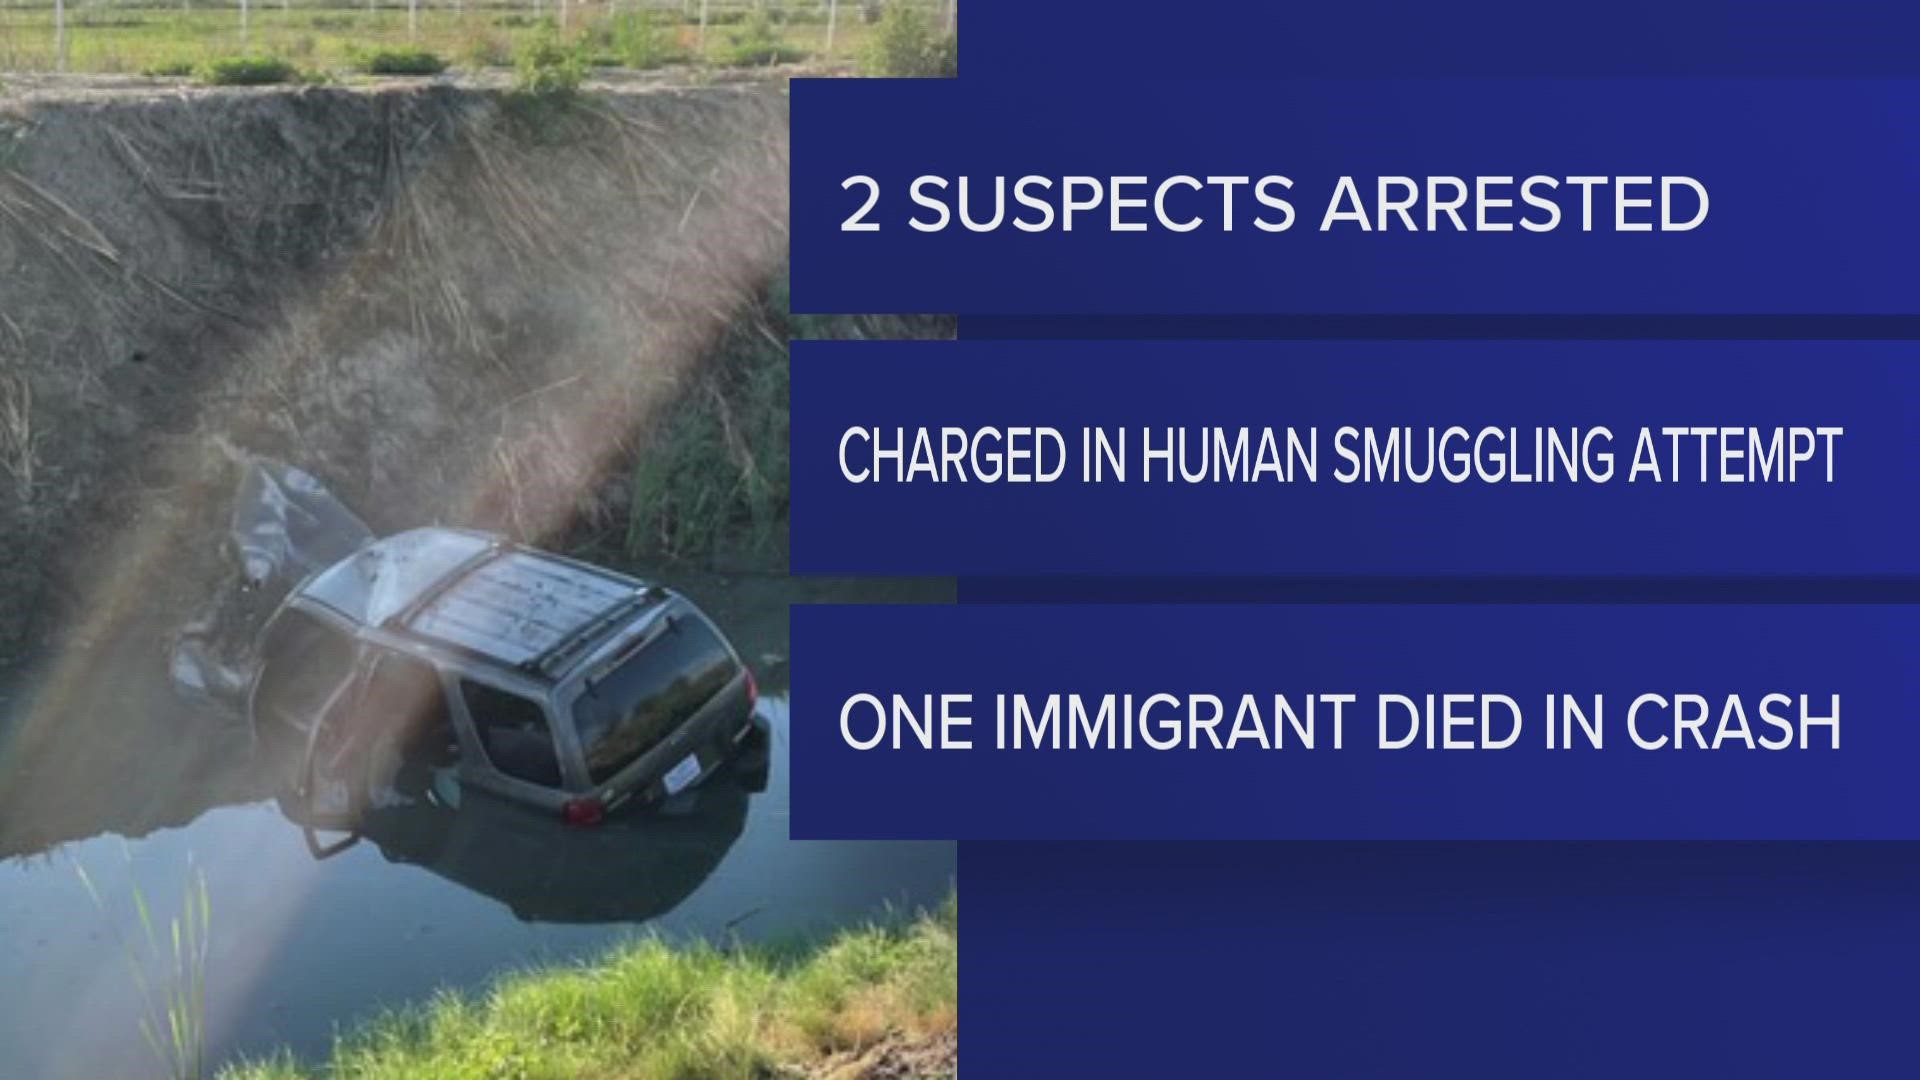 The Homeland Security Investigations have arrested Axel Elias Ramirez and Jorge Soto-Ochoa for conspiracy after also killing passenger in single car crash.